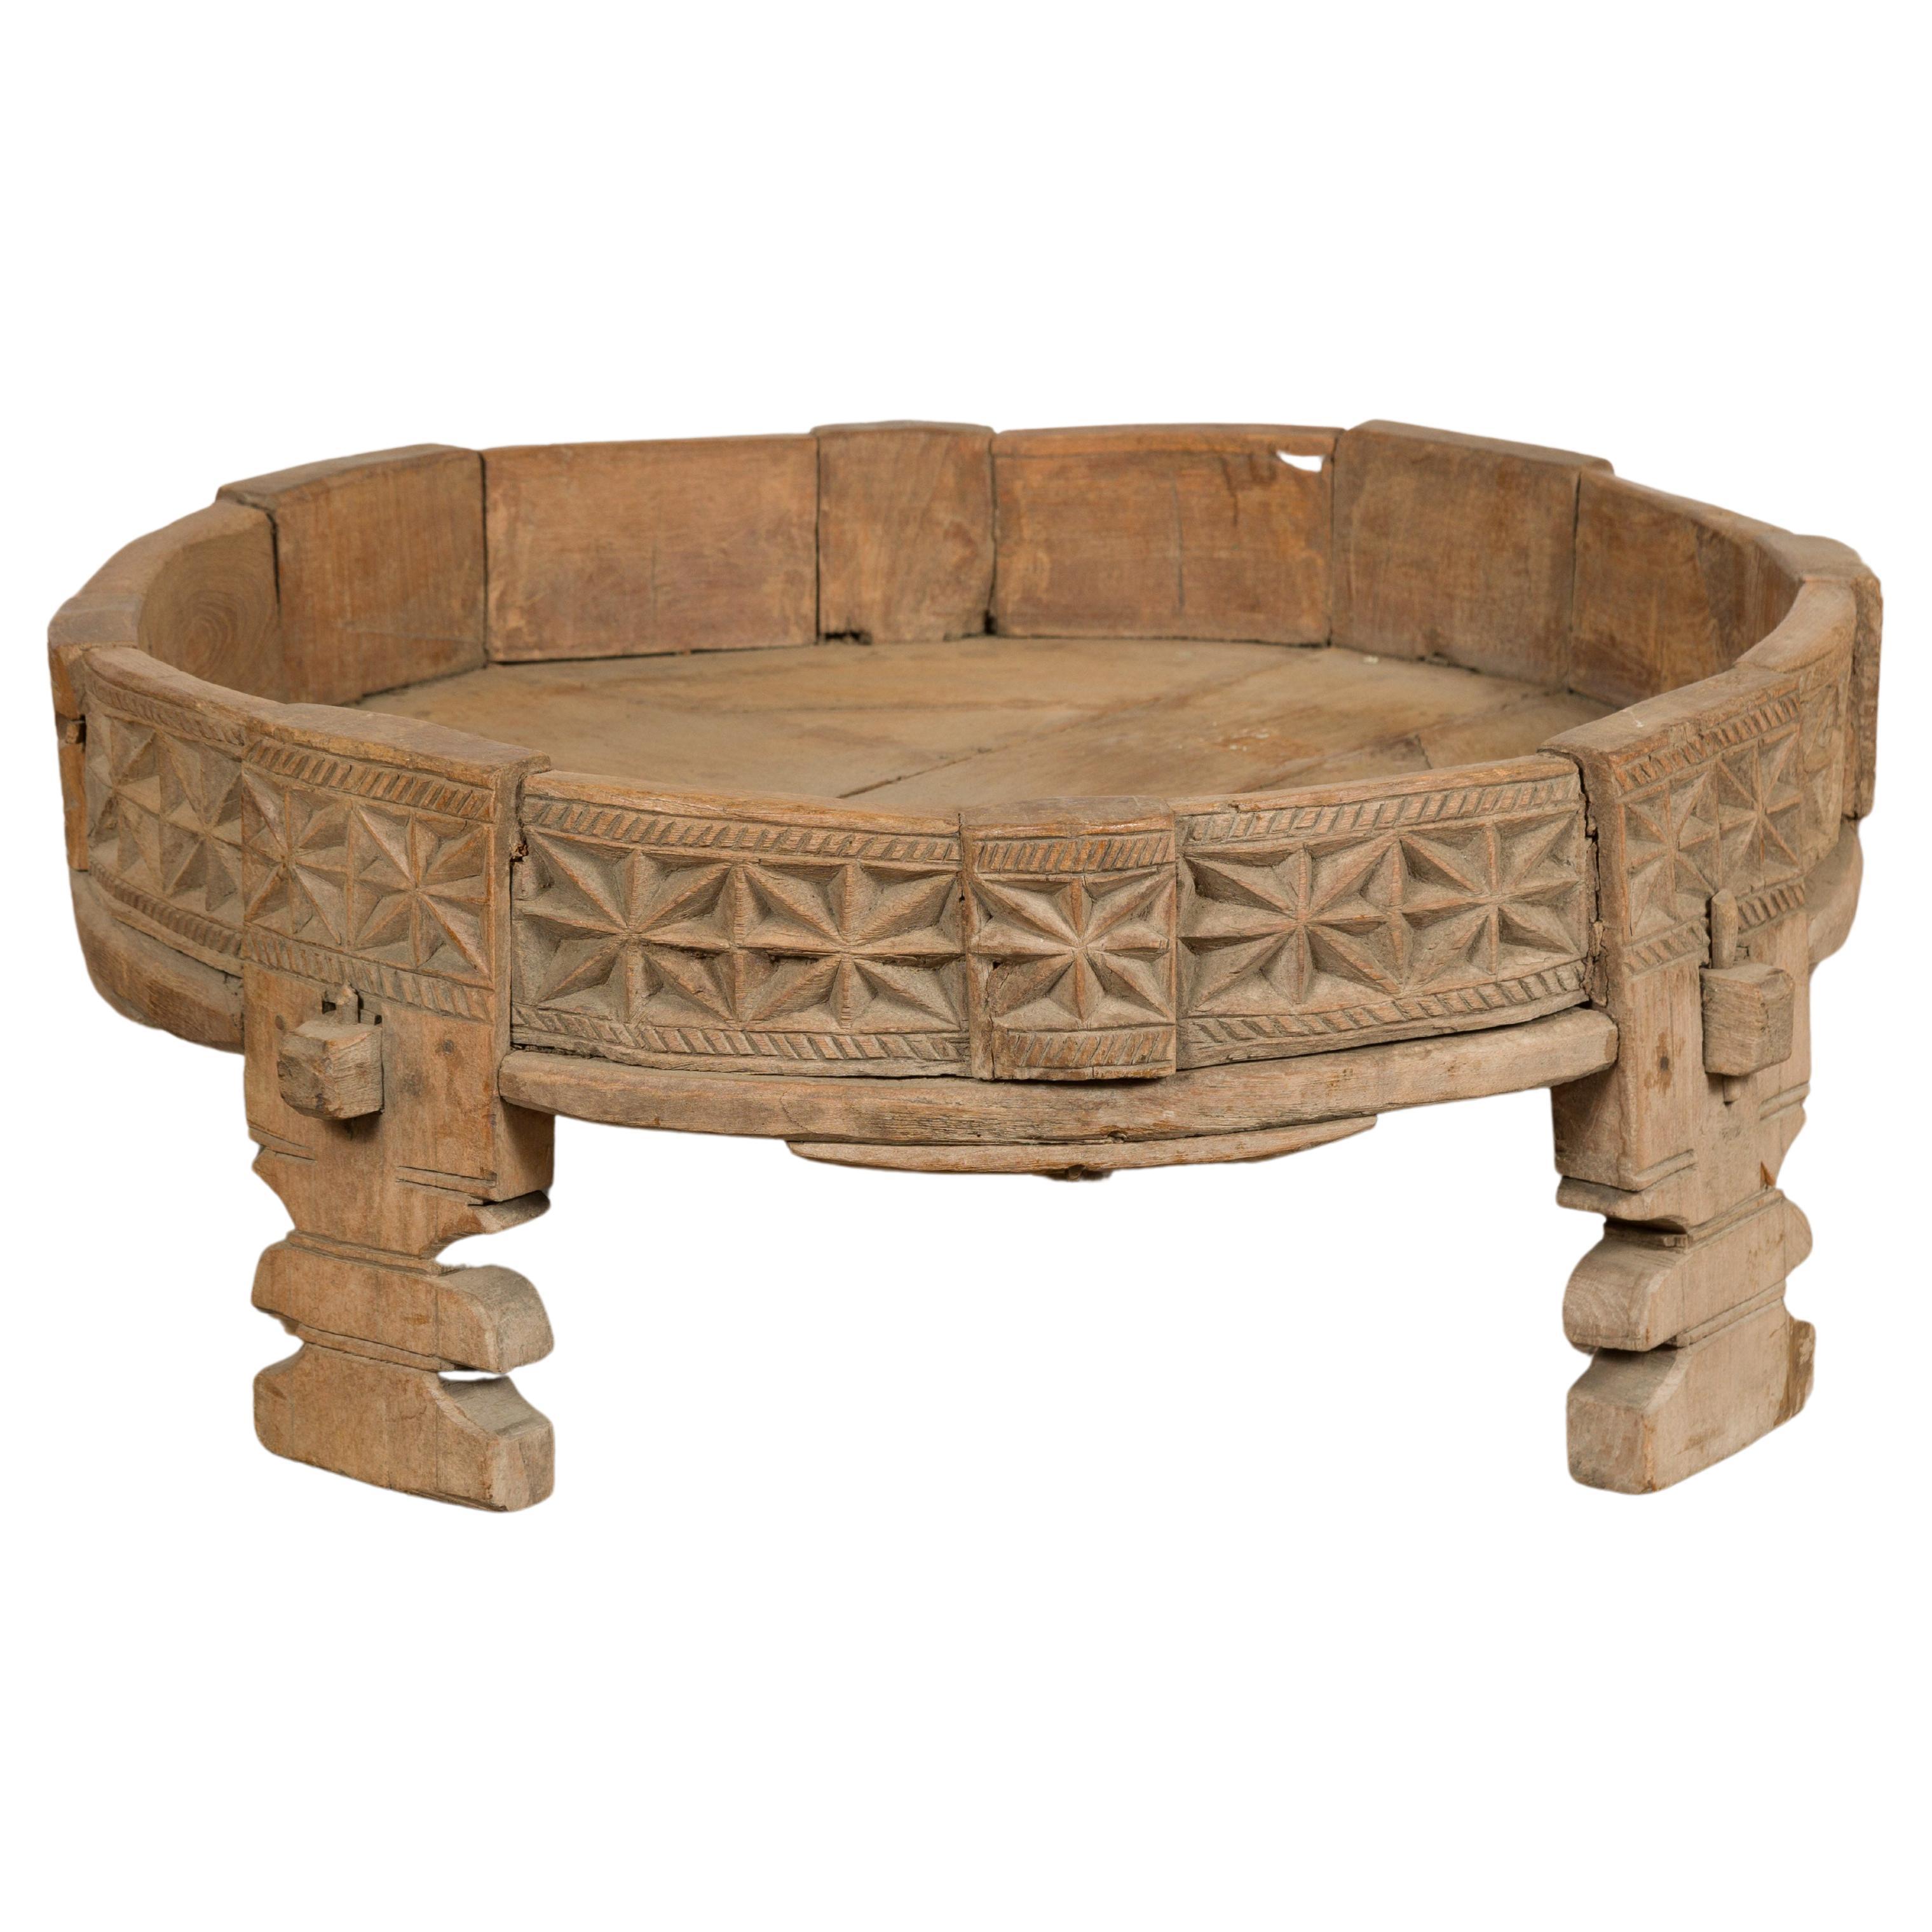 Teak 1920s Indian Chakki Grinding Table with Hand Carved Geometric Décor For Sale